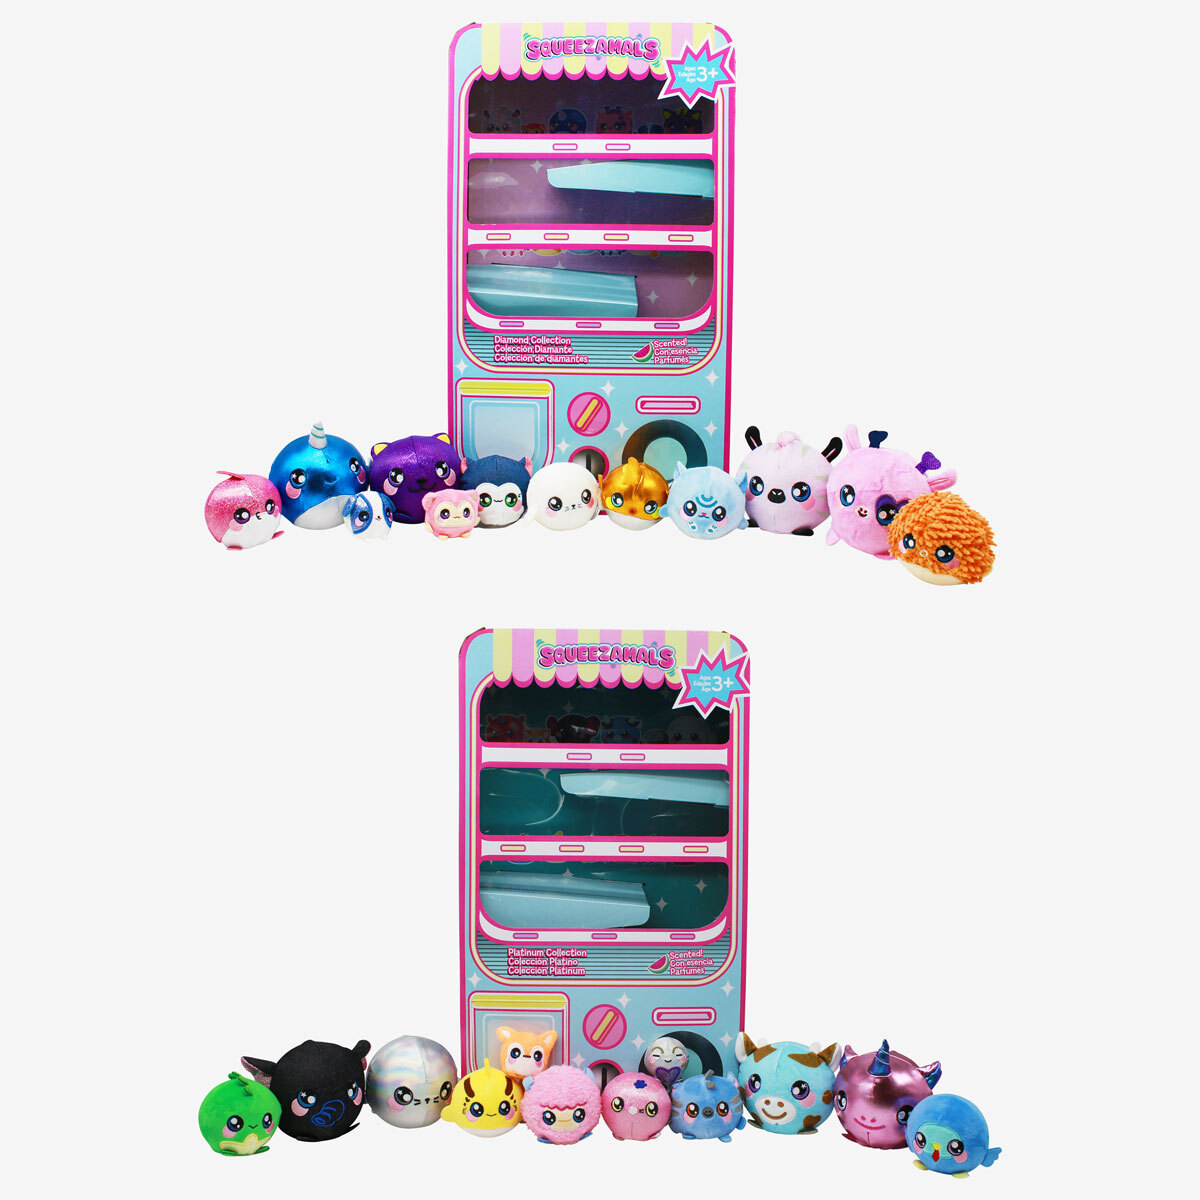 Squeezamals Vending Machine With 12 Squeezamals in a Diamond or Platinum Collection (3+ Years)